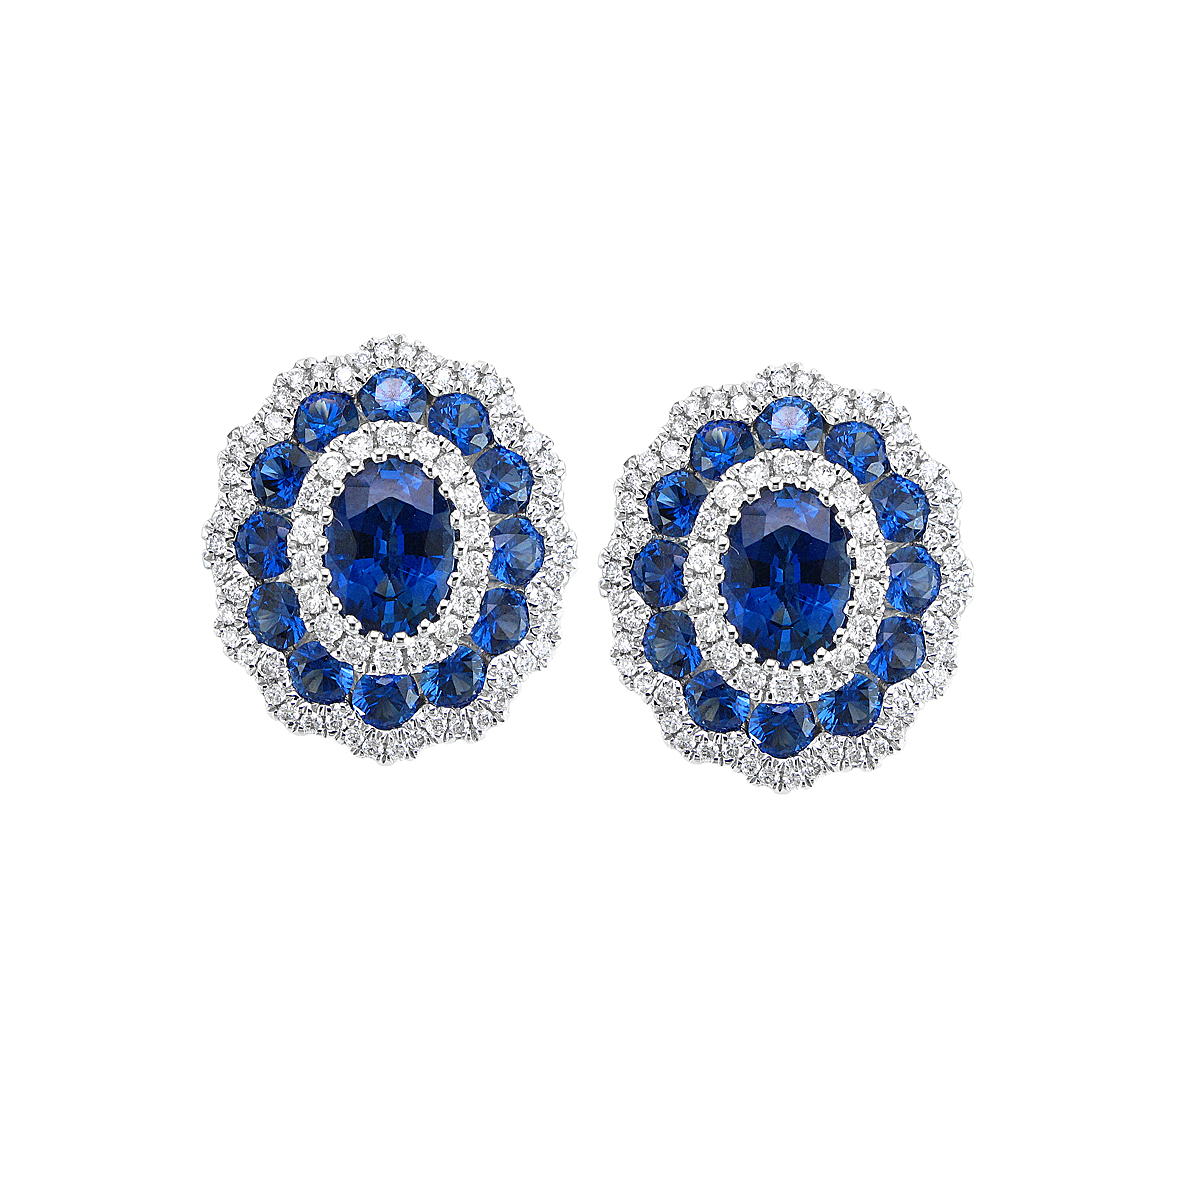 Sapphire and Diamond Earrings - Richards Gems and Jewelry